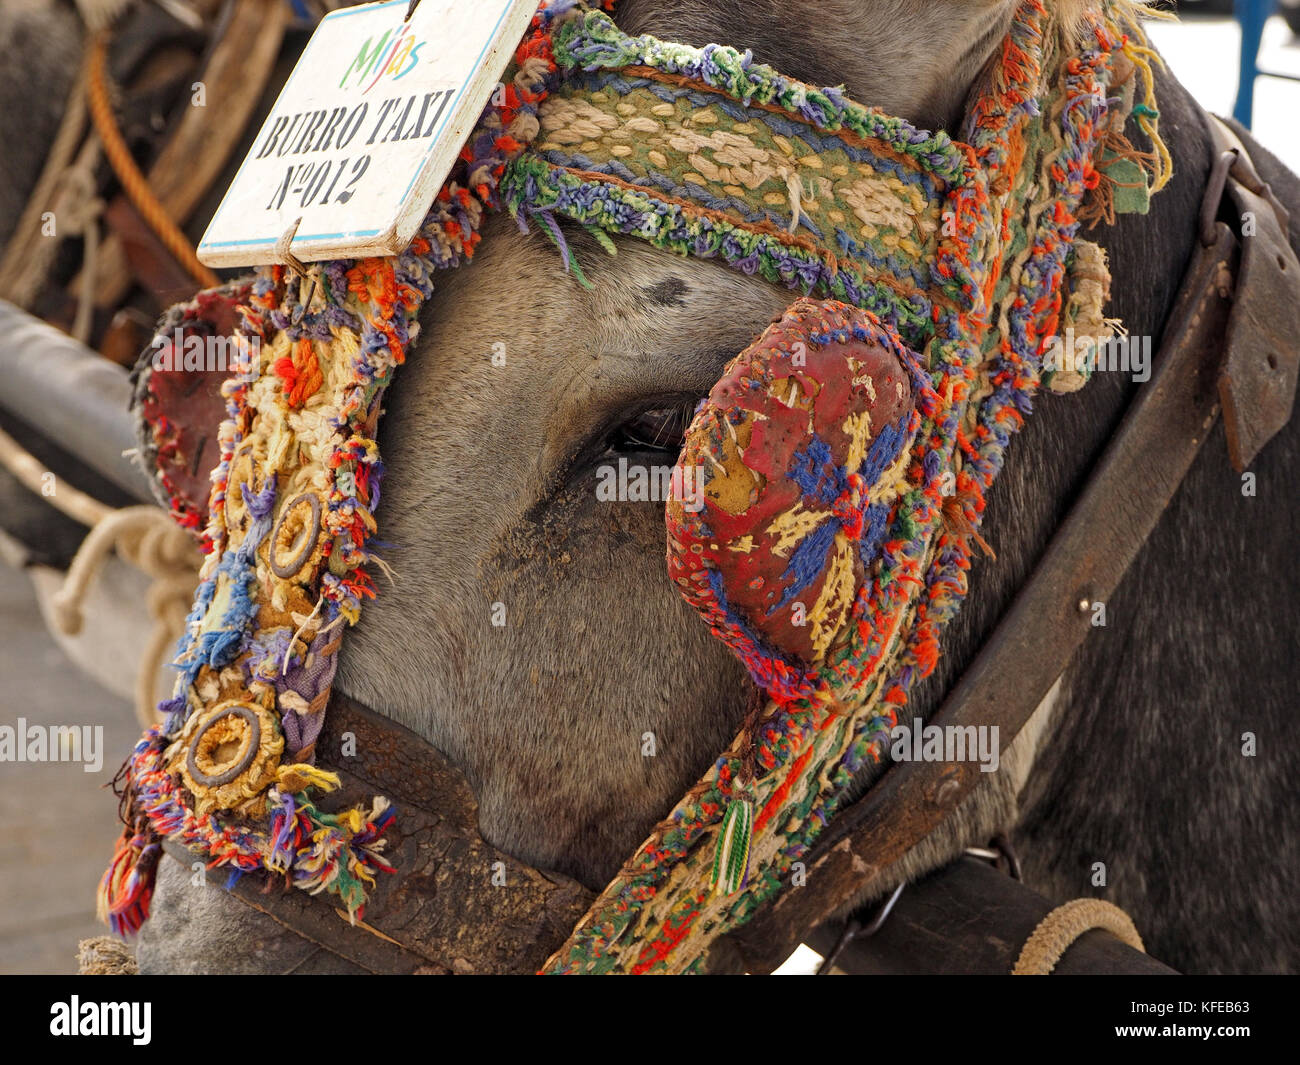 donkey with colourful decorated harness and a sign reading Burro taxi No. 12 at the Donkey-taxi rank in Mijas, Spain Stock Photo